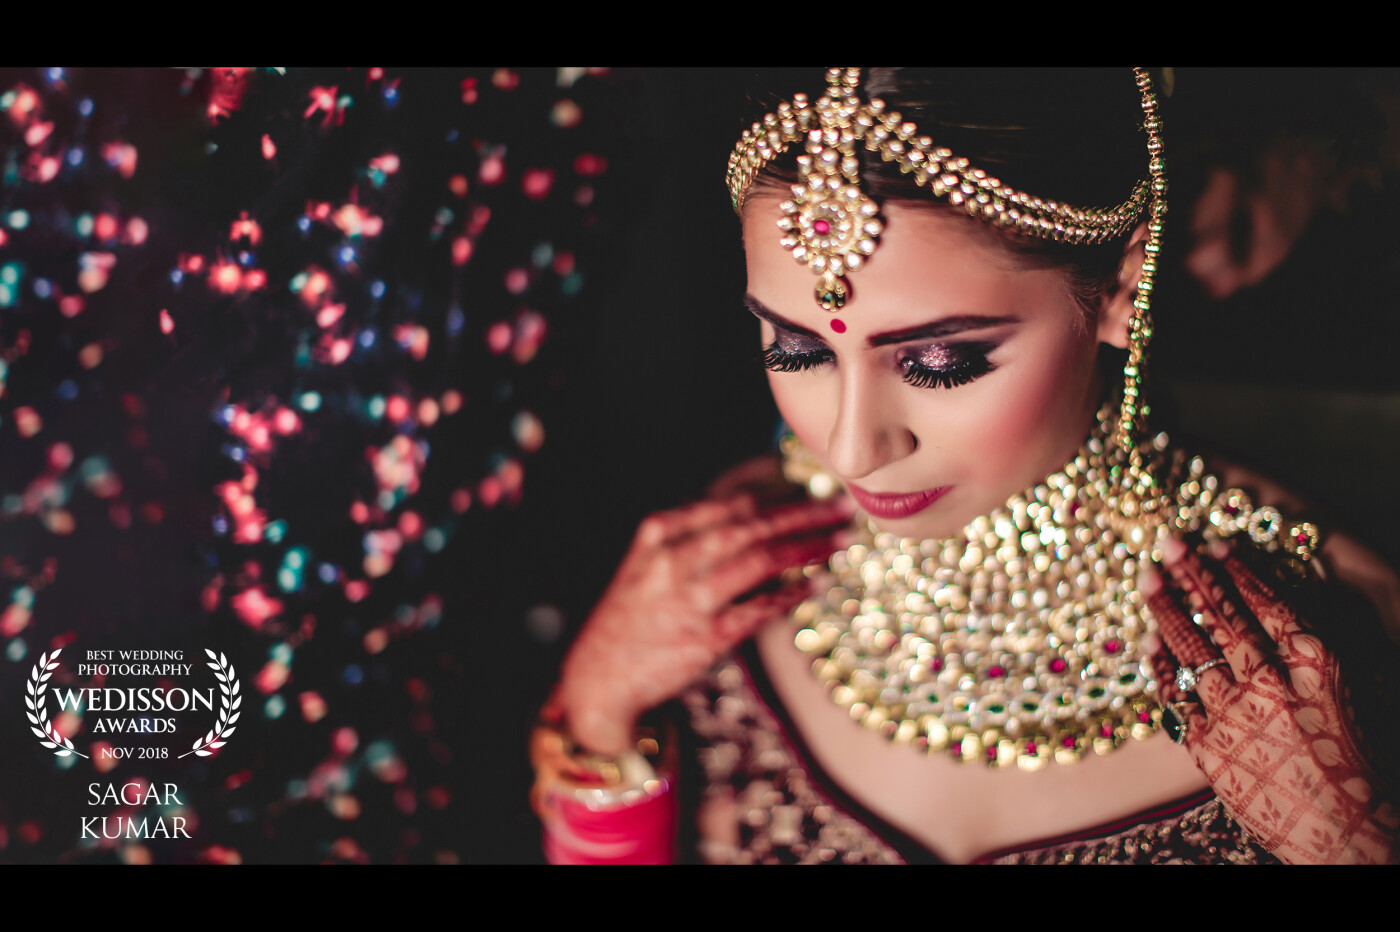 The colours in the frame when Vriti (the bride) was getting ready for her big day were overwhelming. Decoration lights in the background served as a perfect bokeh to complement the hues in Vriti's dress and jewellery.